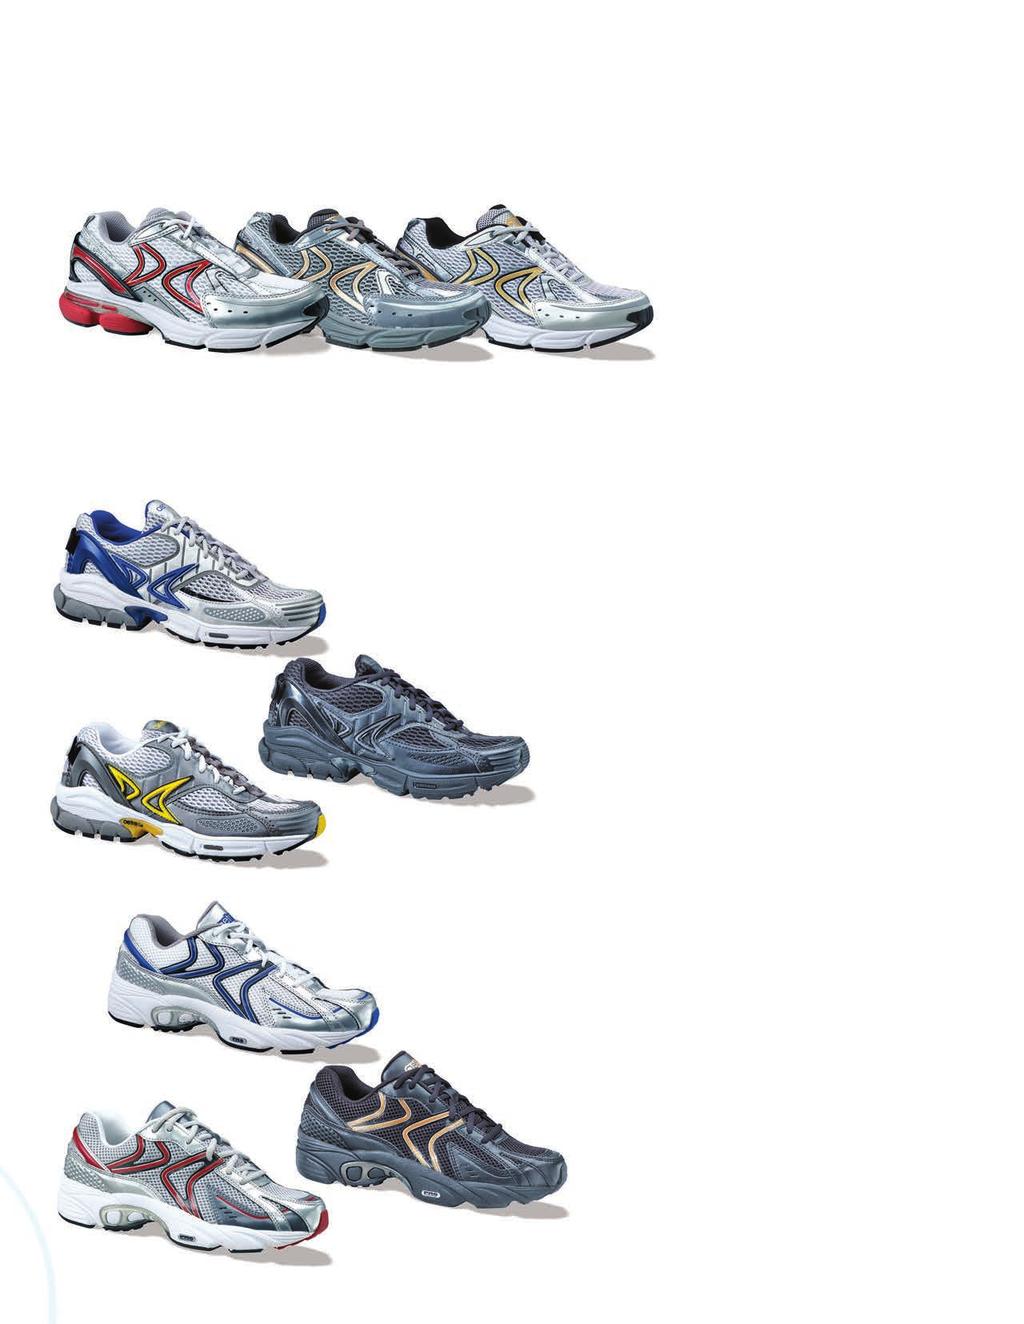 RX RUNNERS - Q last for rearfoot stability & forefoot freedom - Midsole stability plate for torsional rigidity & pressure dispersion - TPU footbridge controls motion & stabilizes midsole -